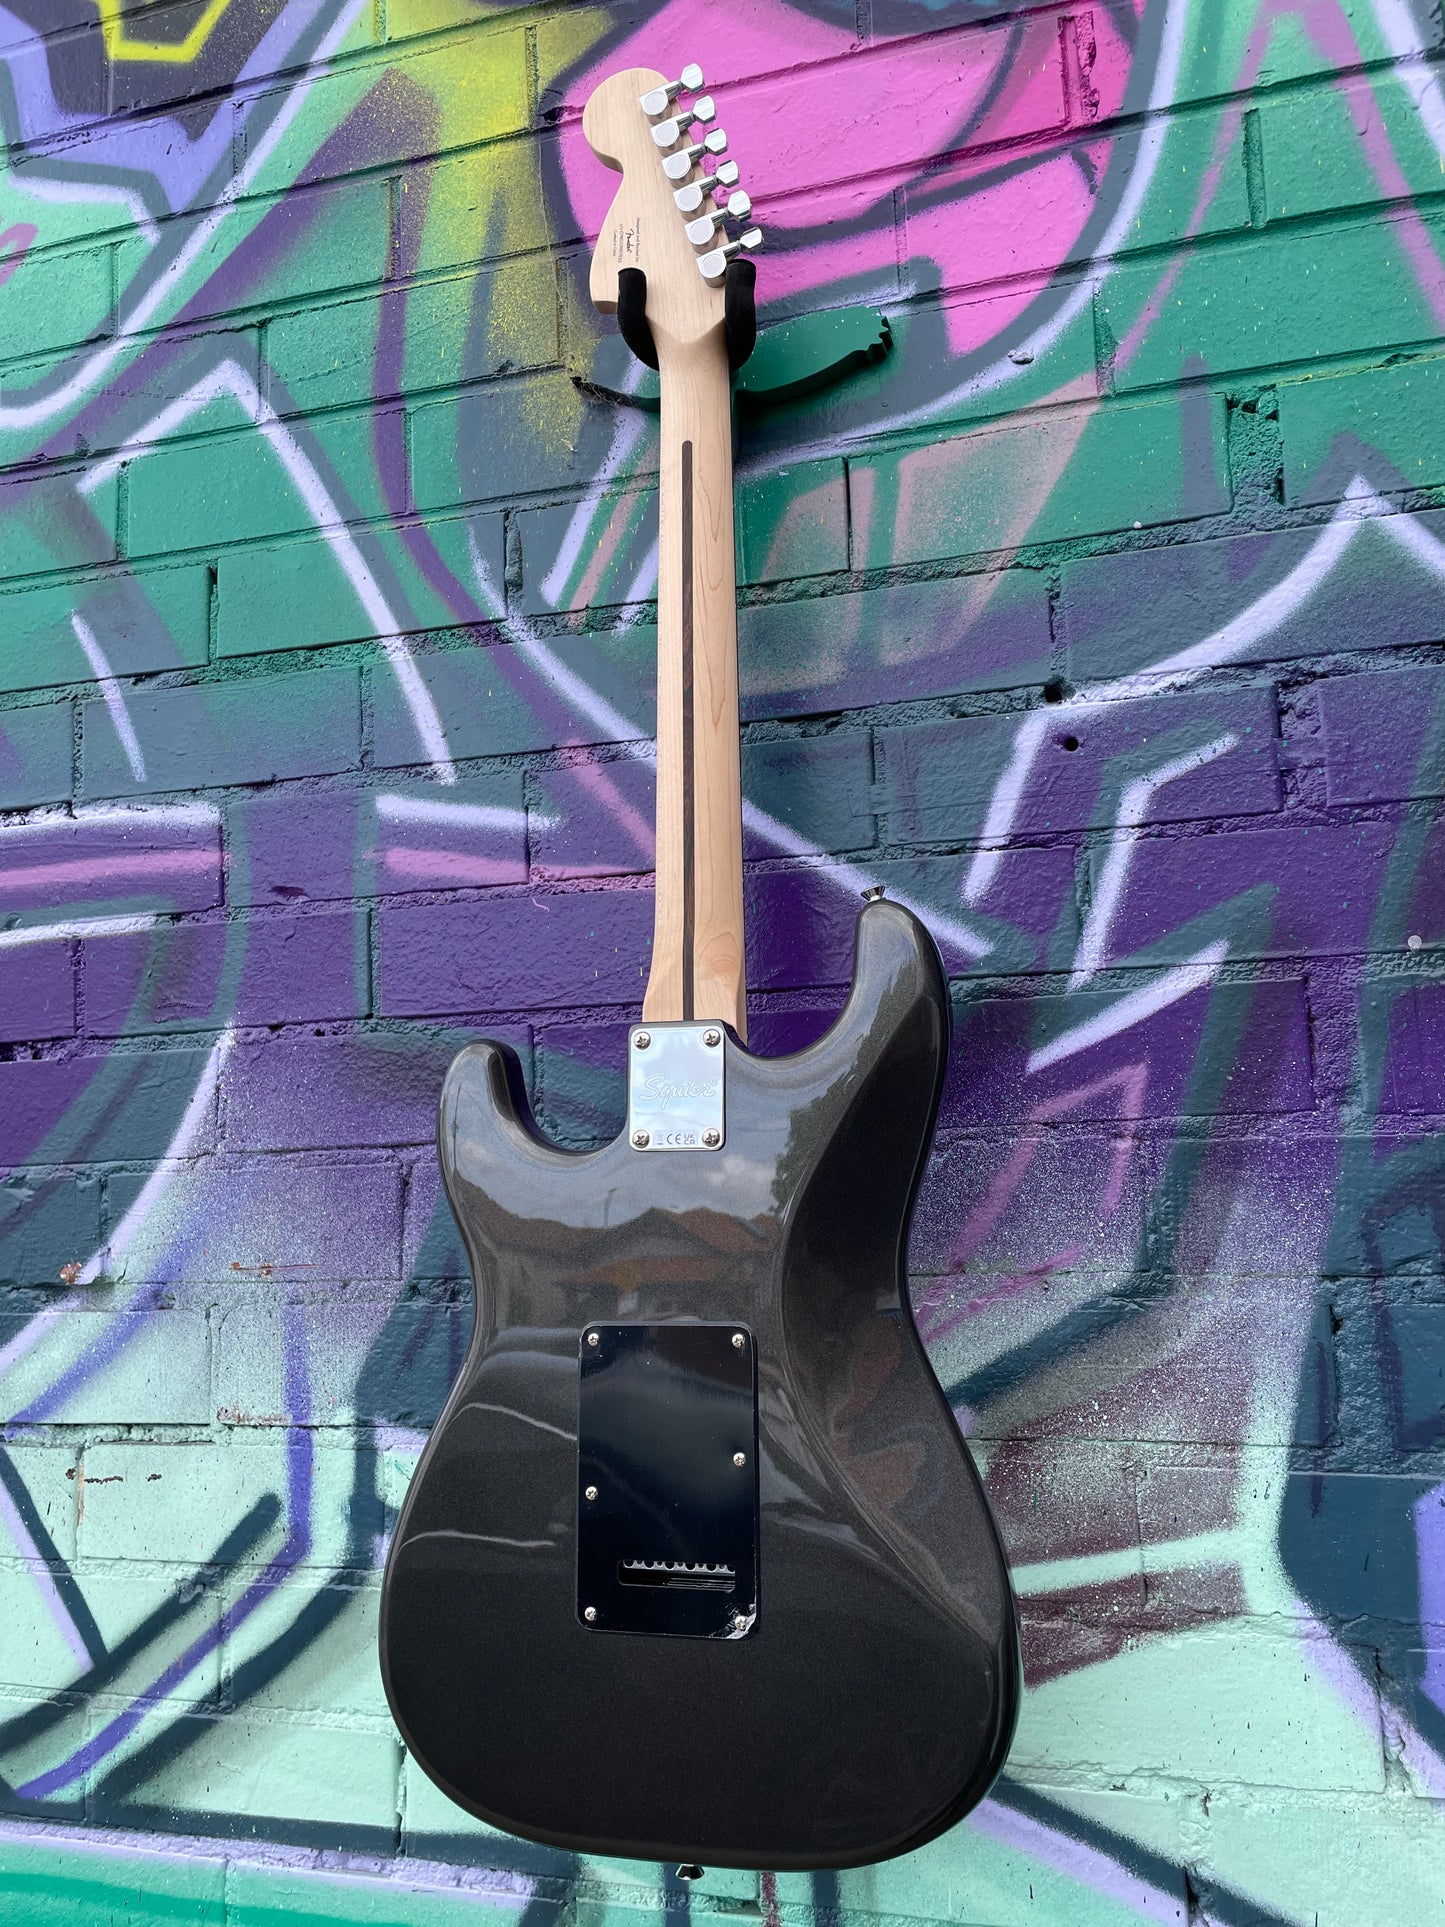 Squier Affinity Series Stratocaster HH - Charcoal Frost Metallic